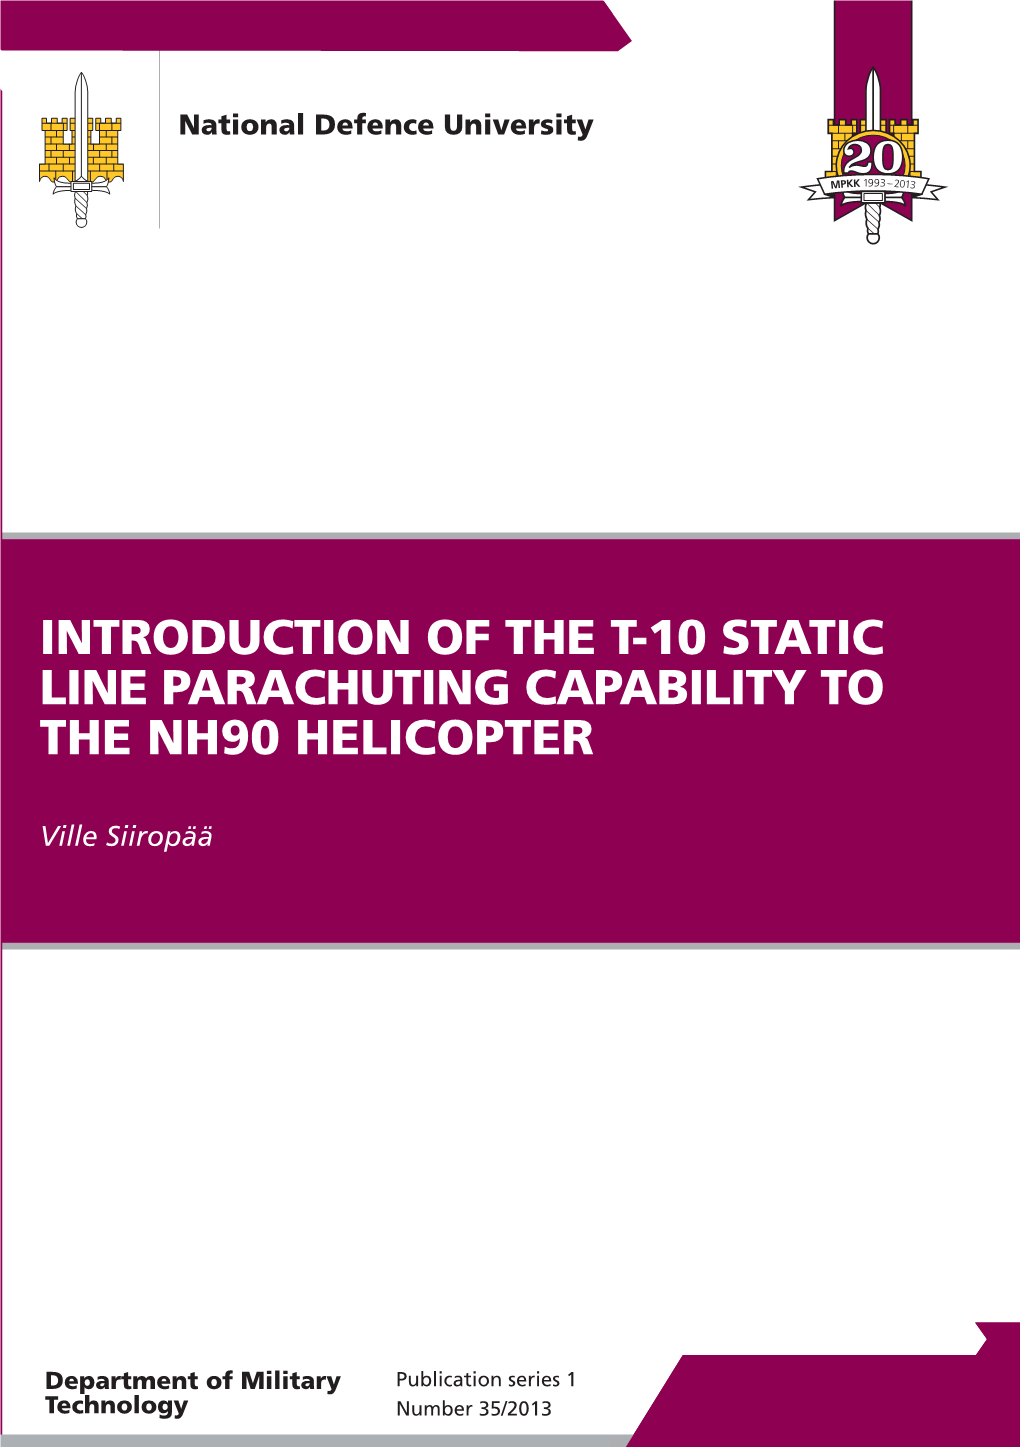 Introduction of the T-10 Static Line Parachuting Capability to the Nh90 Helicopter Introduction of the T-10 Static Line Parachuting Capability to the Nh90 Helicopter